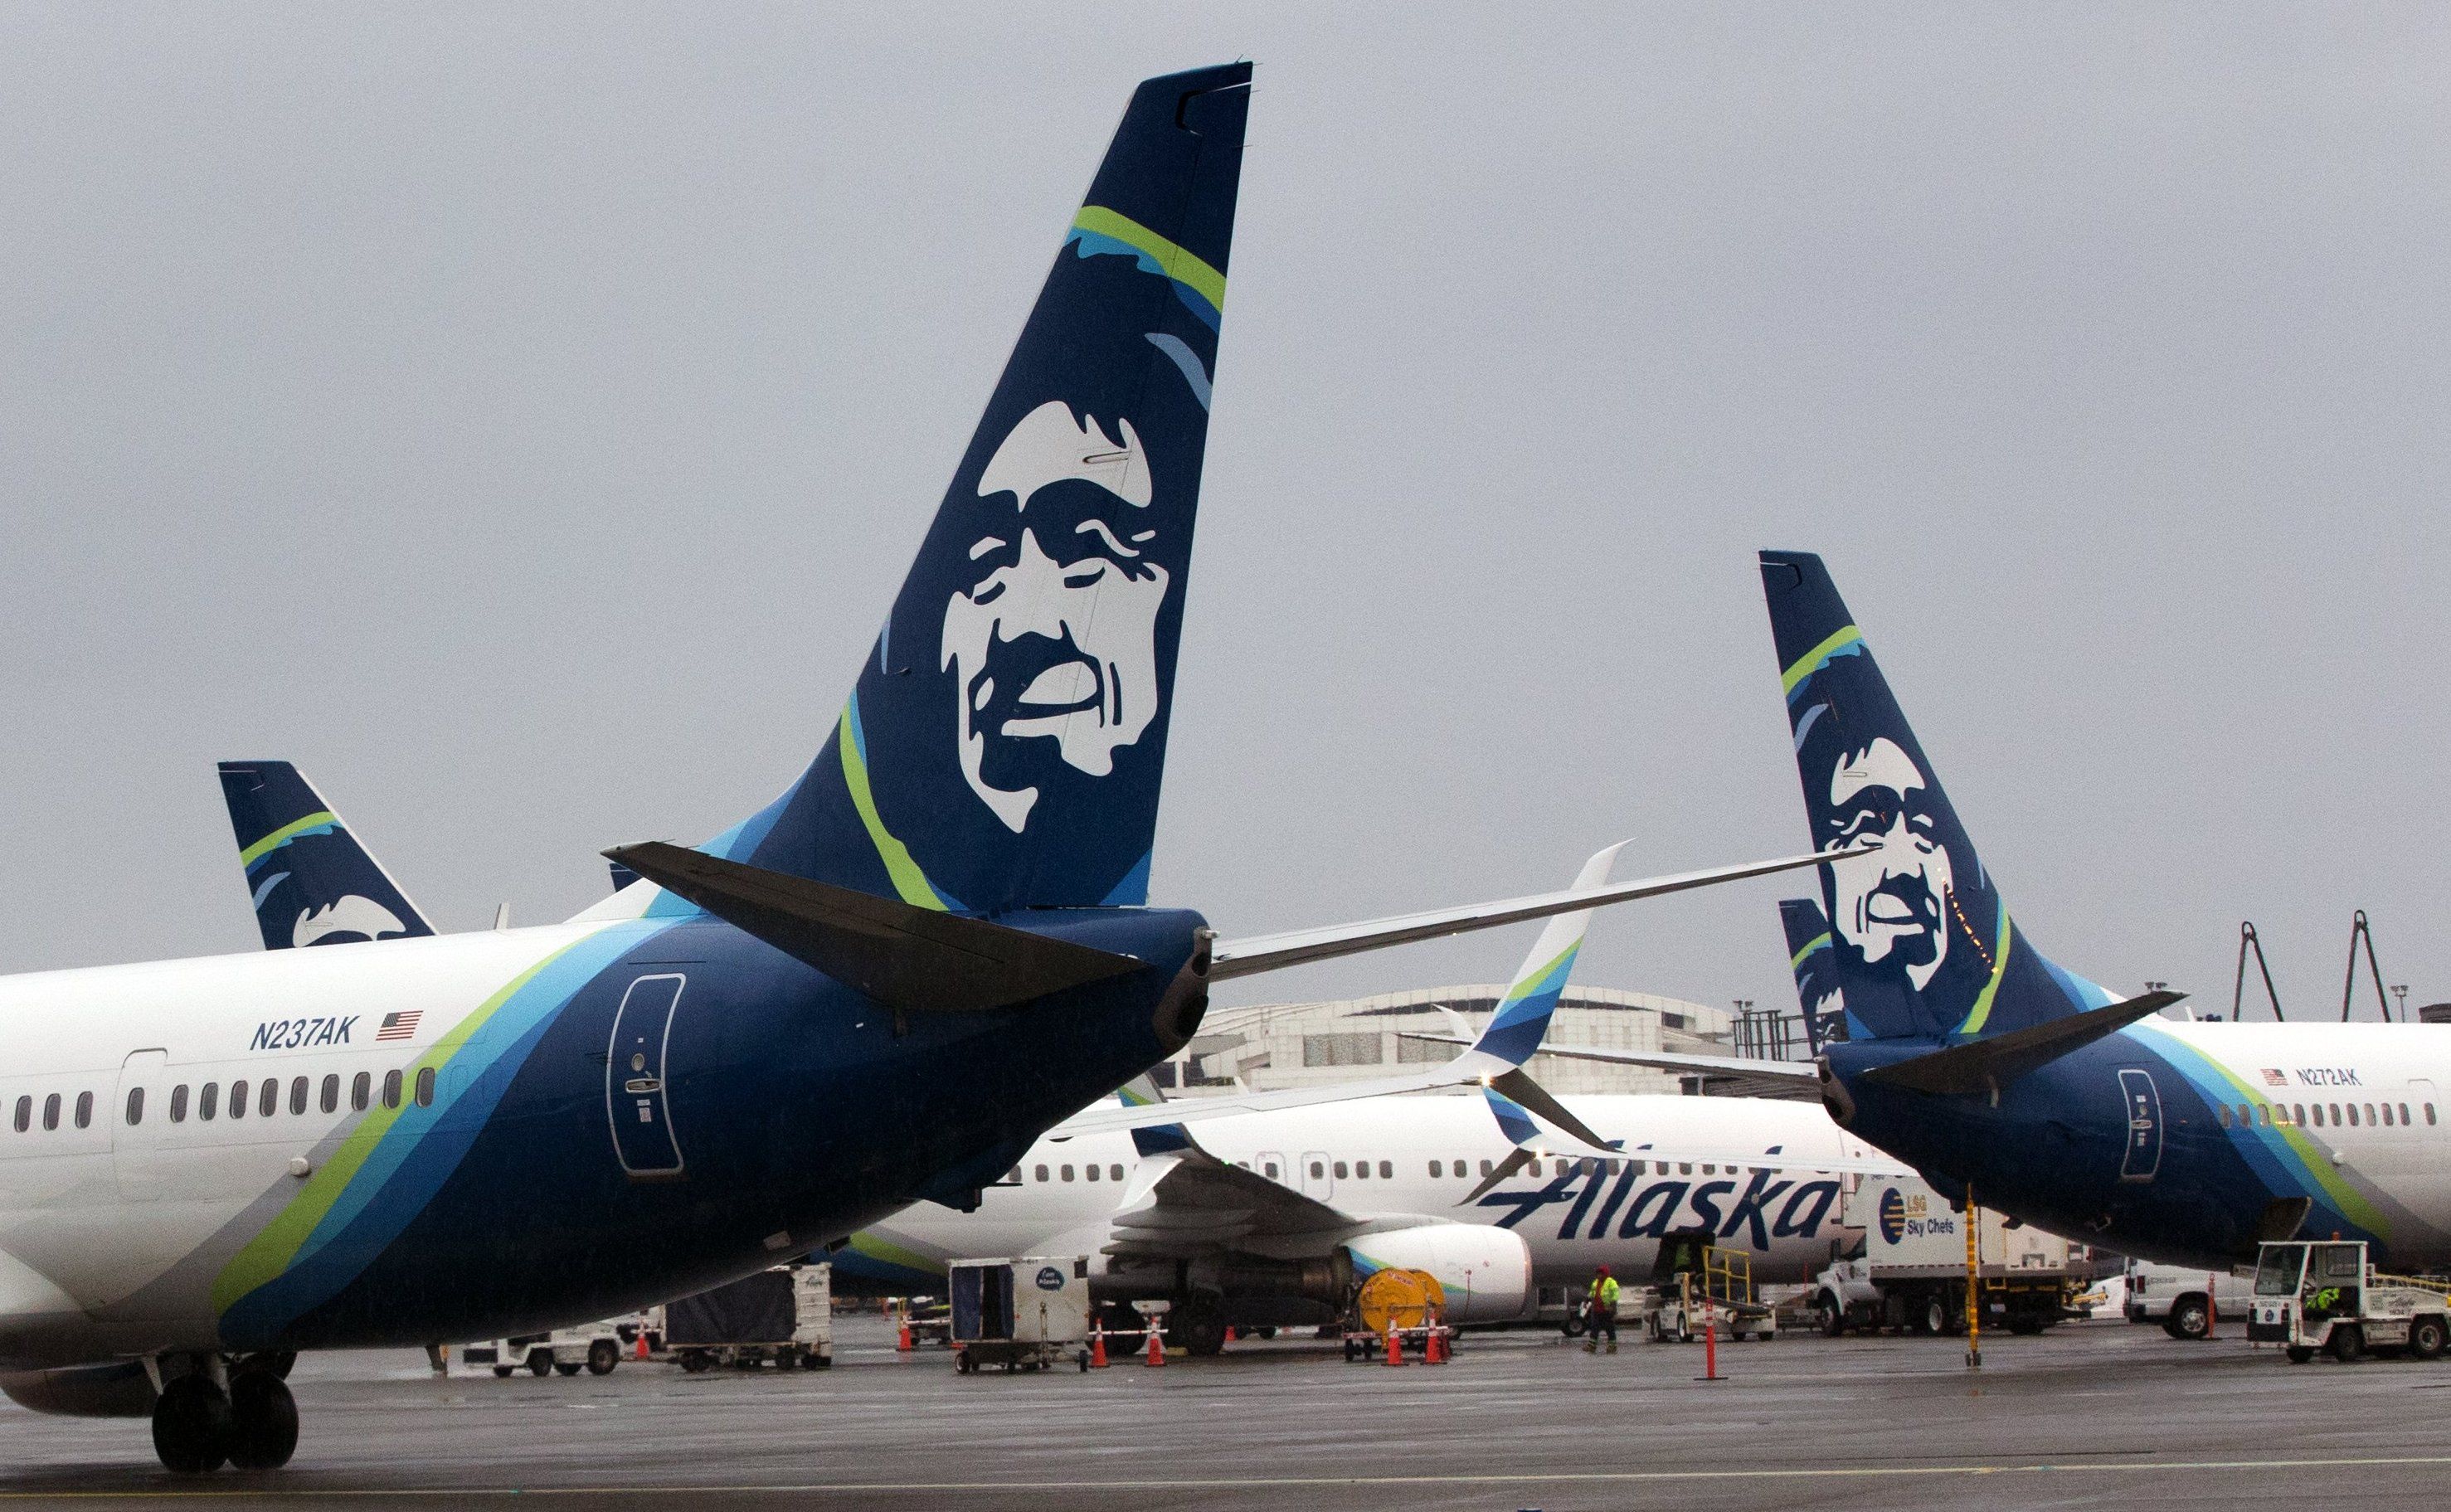 As Alaska Air cuts costs, employee discontent grows and passenger